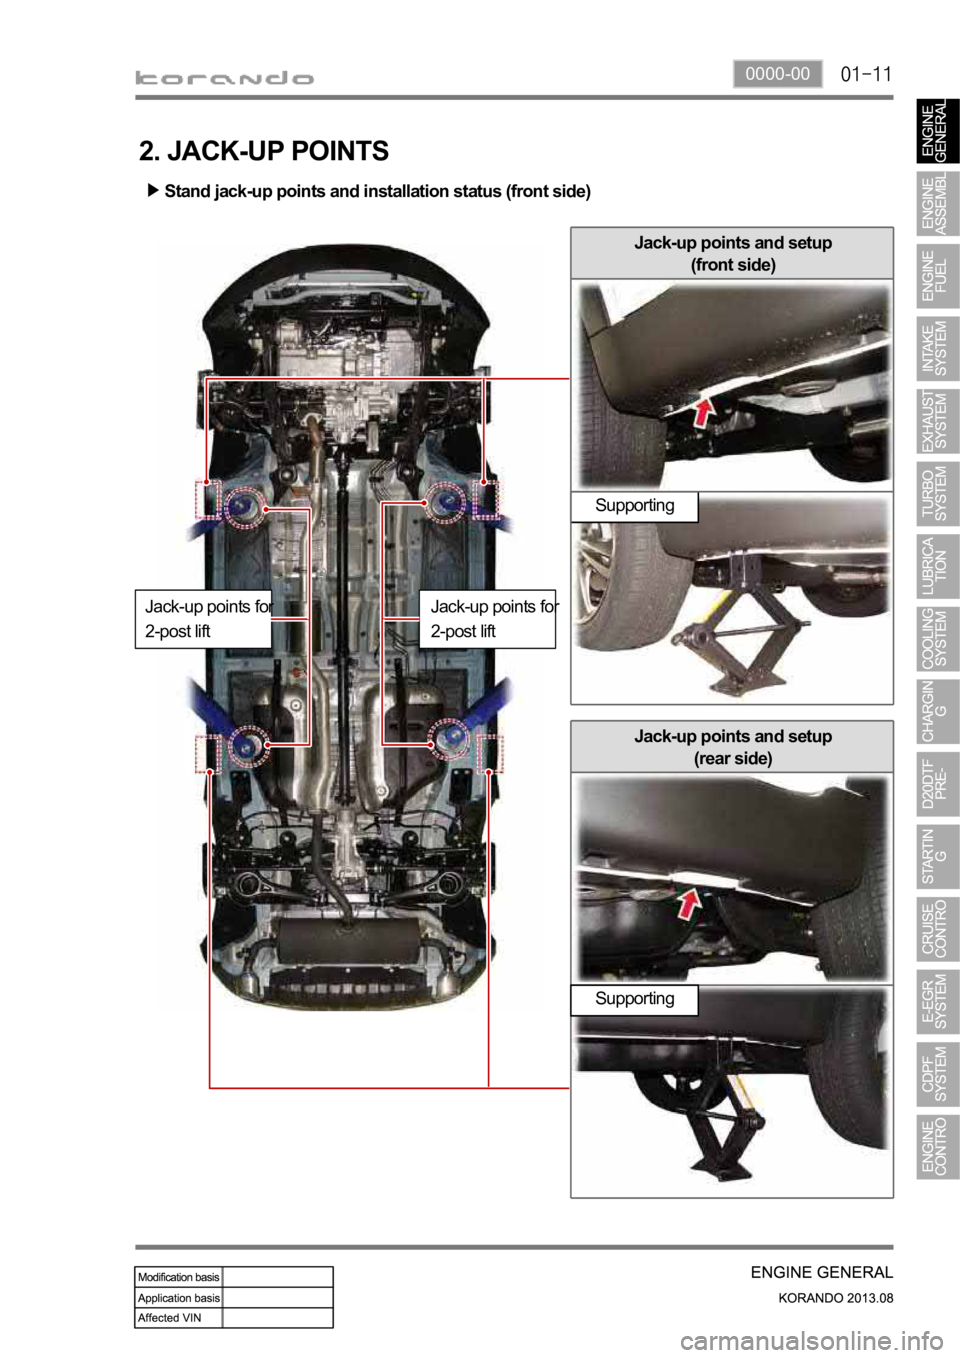 SSANGYONG KORANDO 2013  Service Manual 0000-00
2. JACK-UP POINTS
Stand jack-up points and installation status (front side)
Jack-up points for 
2-post liftJack-up points for 
2-post liftSupporting
Jack-up points and setup
(rear side)
Suppor